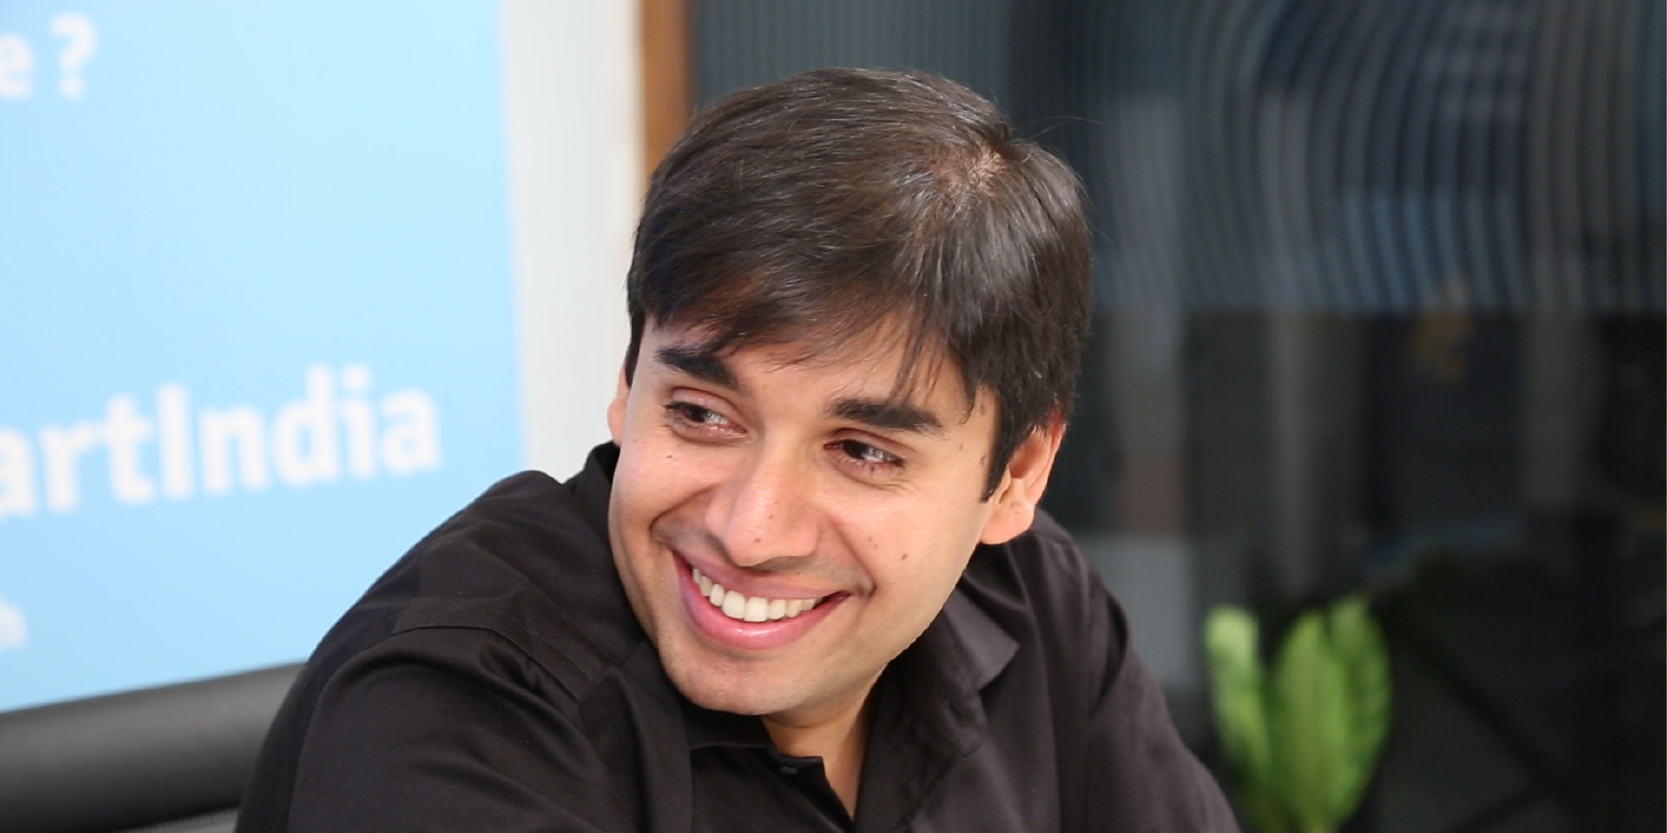 Don’t let success go to your head: Naveen Tewari's rapidfire Q&A at Kstart launch